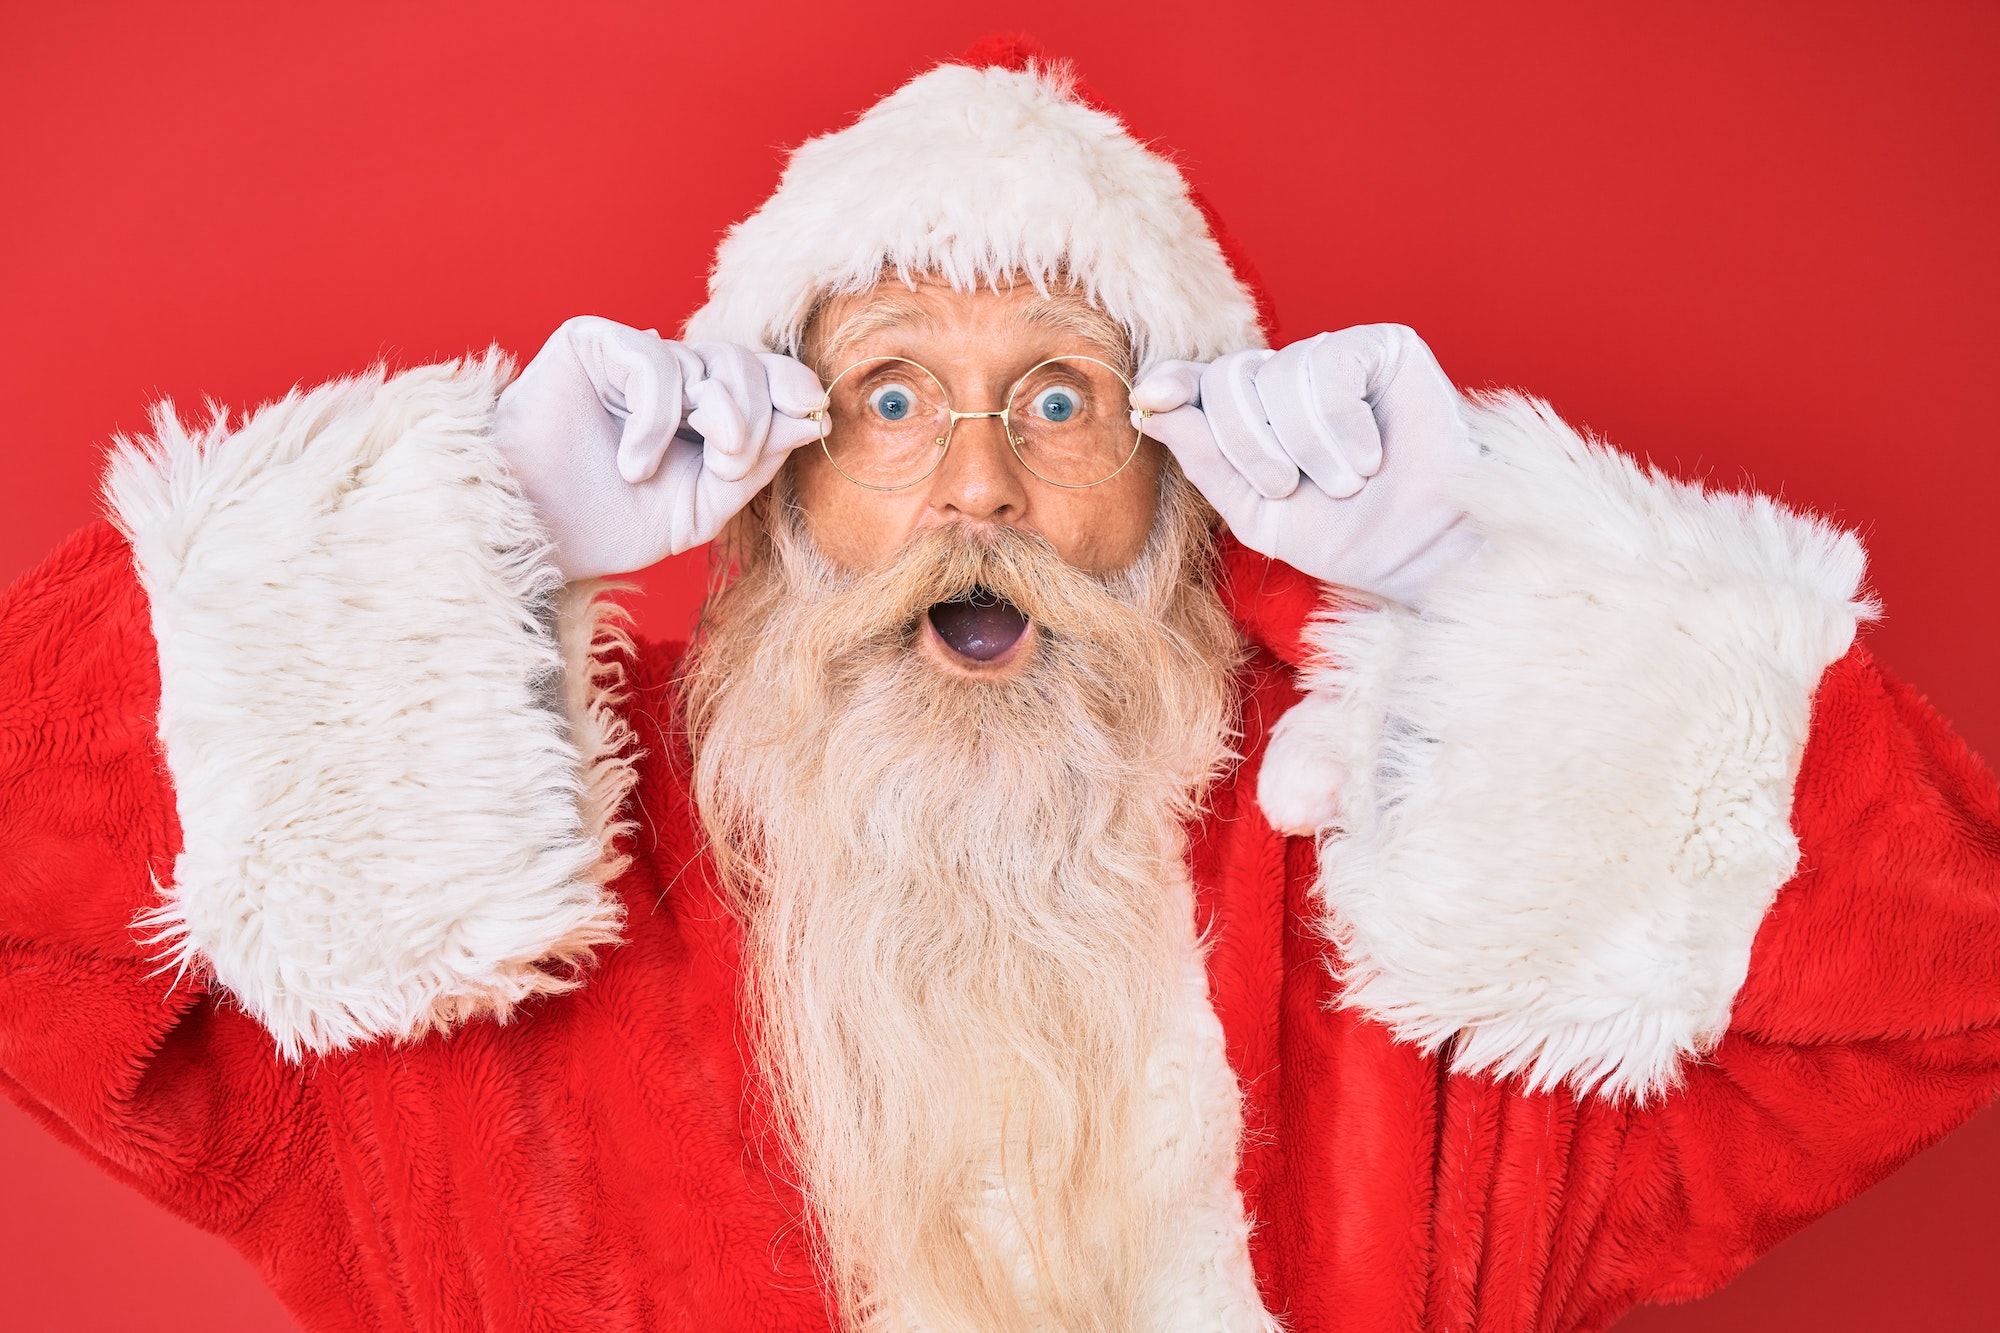 Wonderinterest | Will we witness a Santa Claus rally in the capital markets again this year?